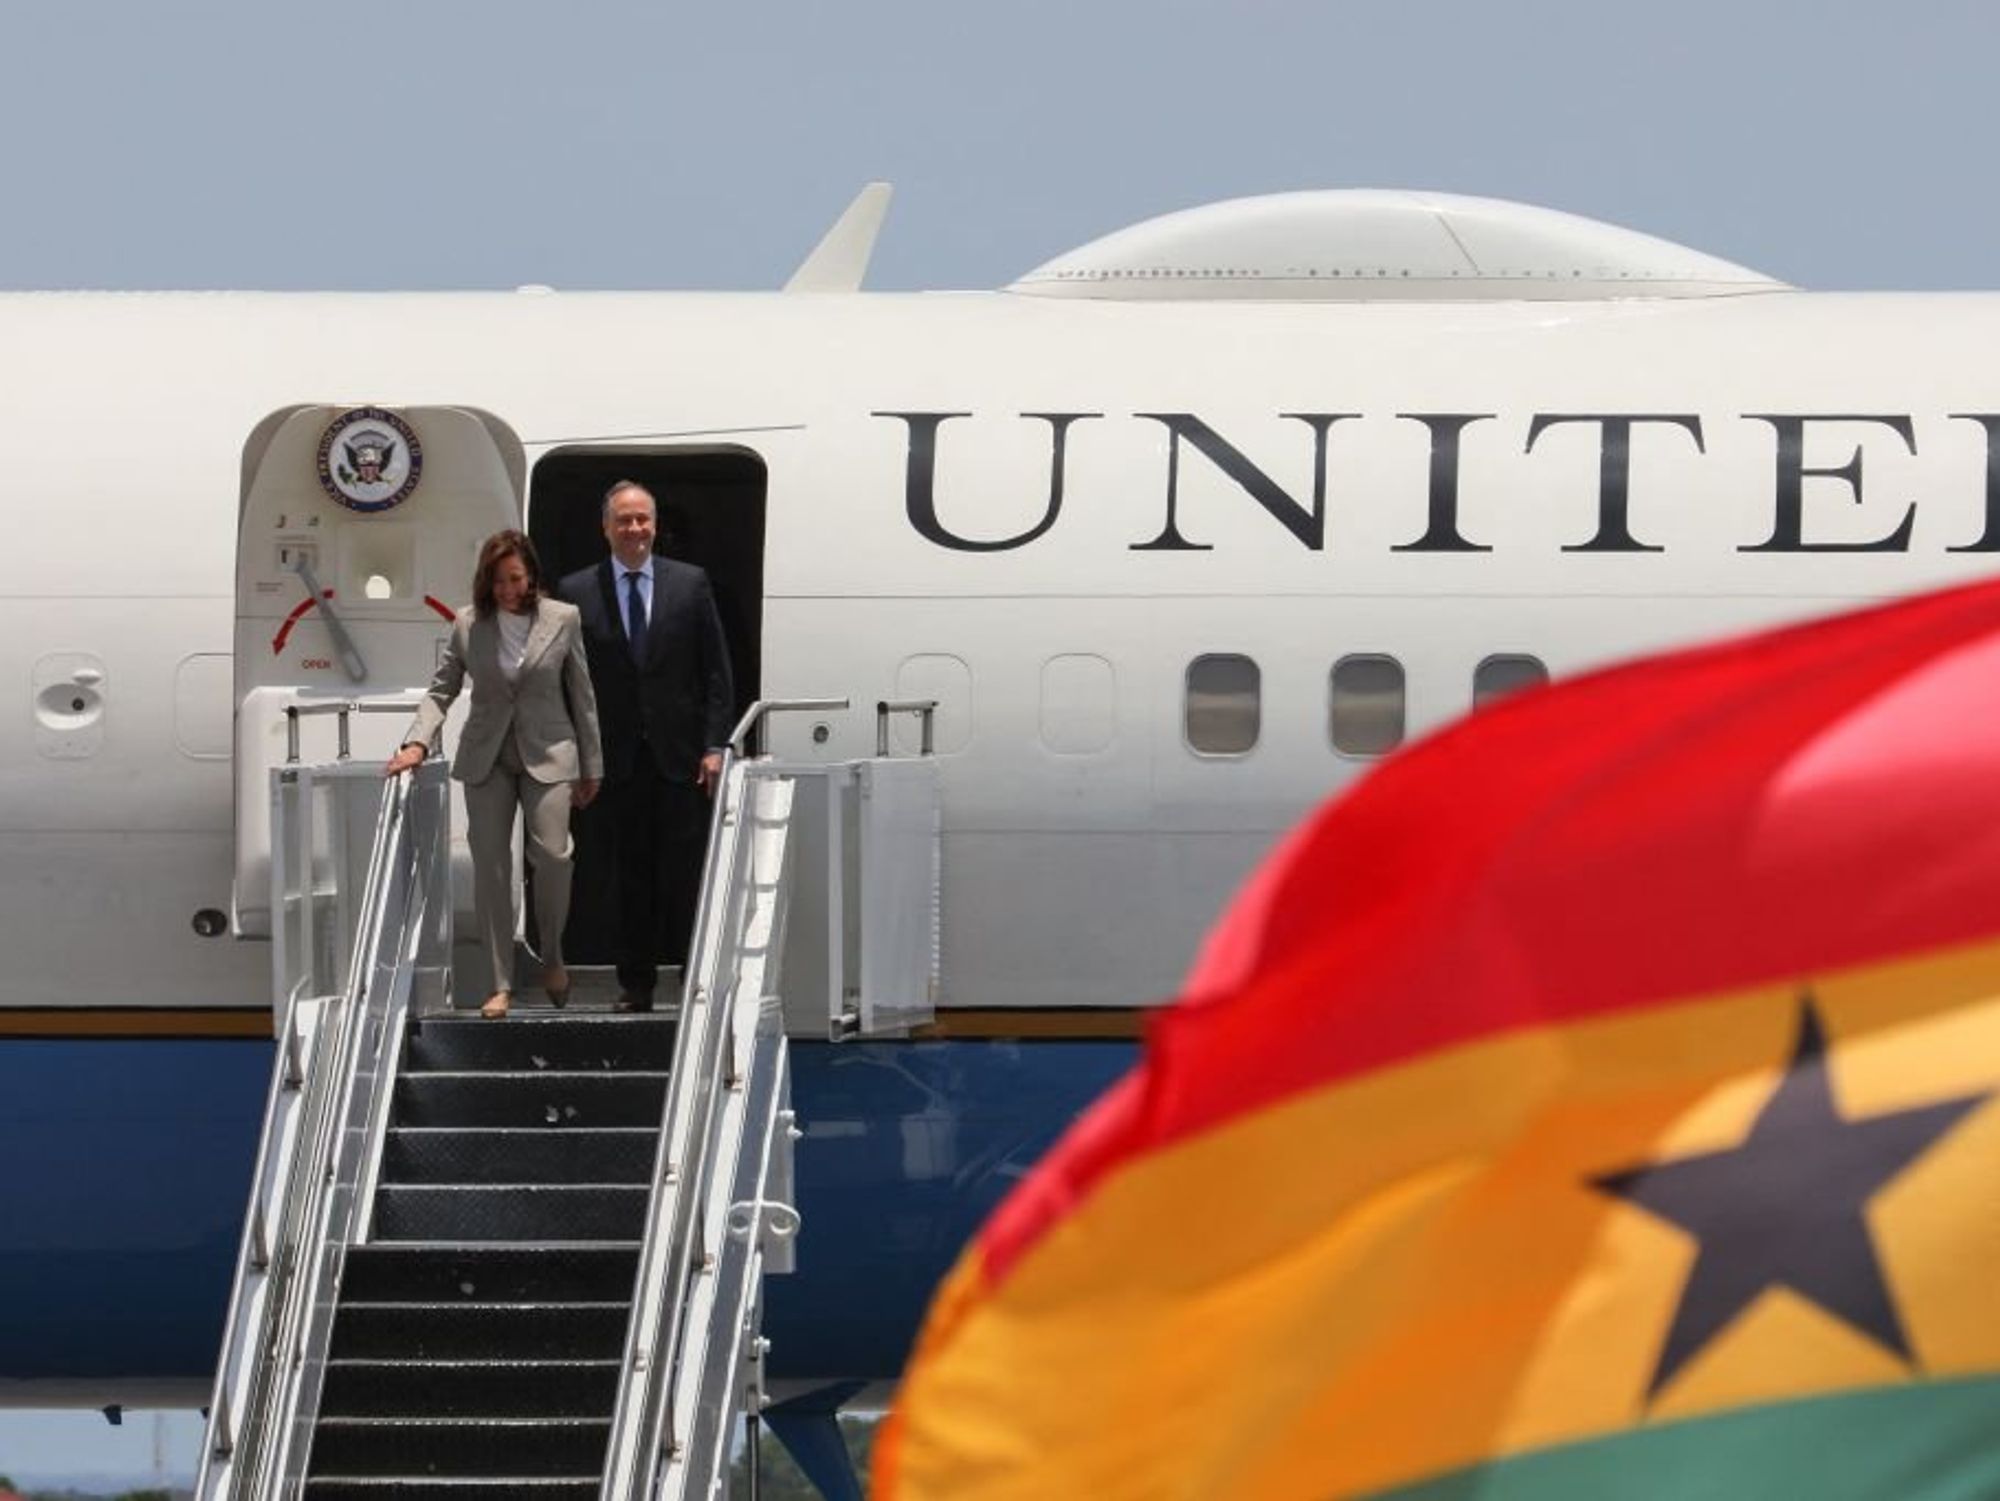 US Vice President Kamala Harris (L) and Second Gentleman of the United States Douglas Emhoff (L) disembarks the plane as they arrive at the Kotoka International Airport in Accra, Ghana.